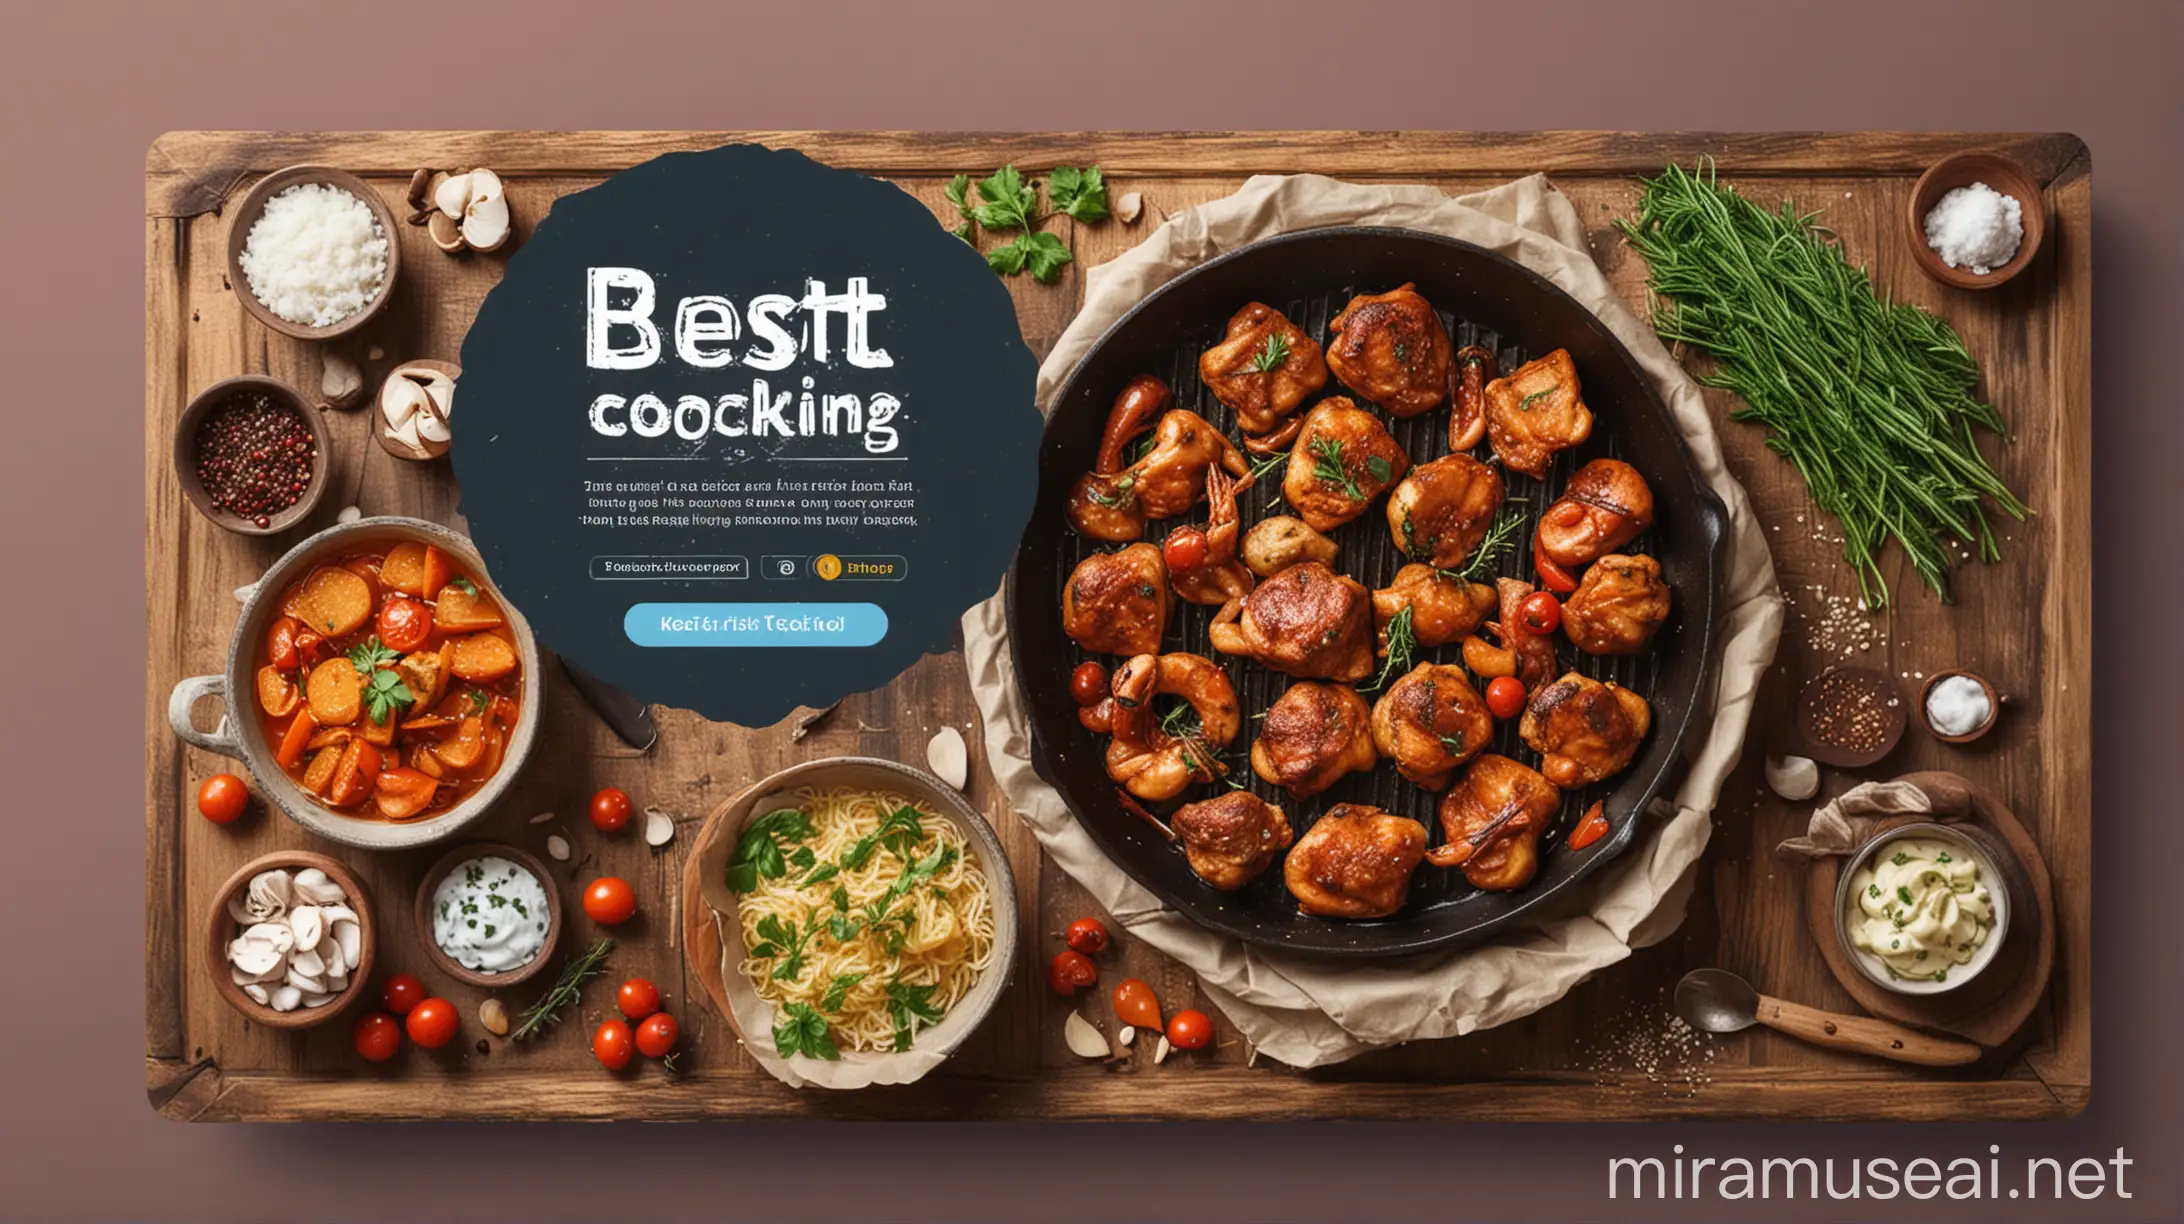  Best cooking and Ketchin related product image for web banner